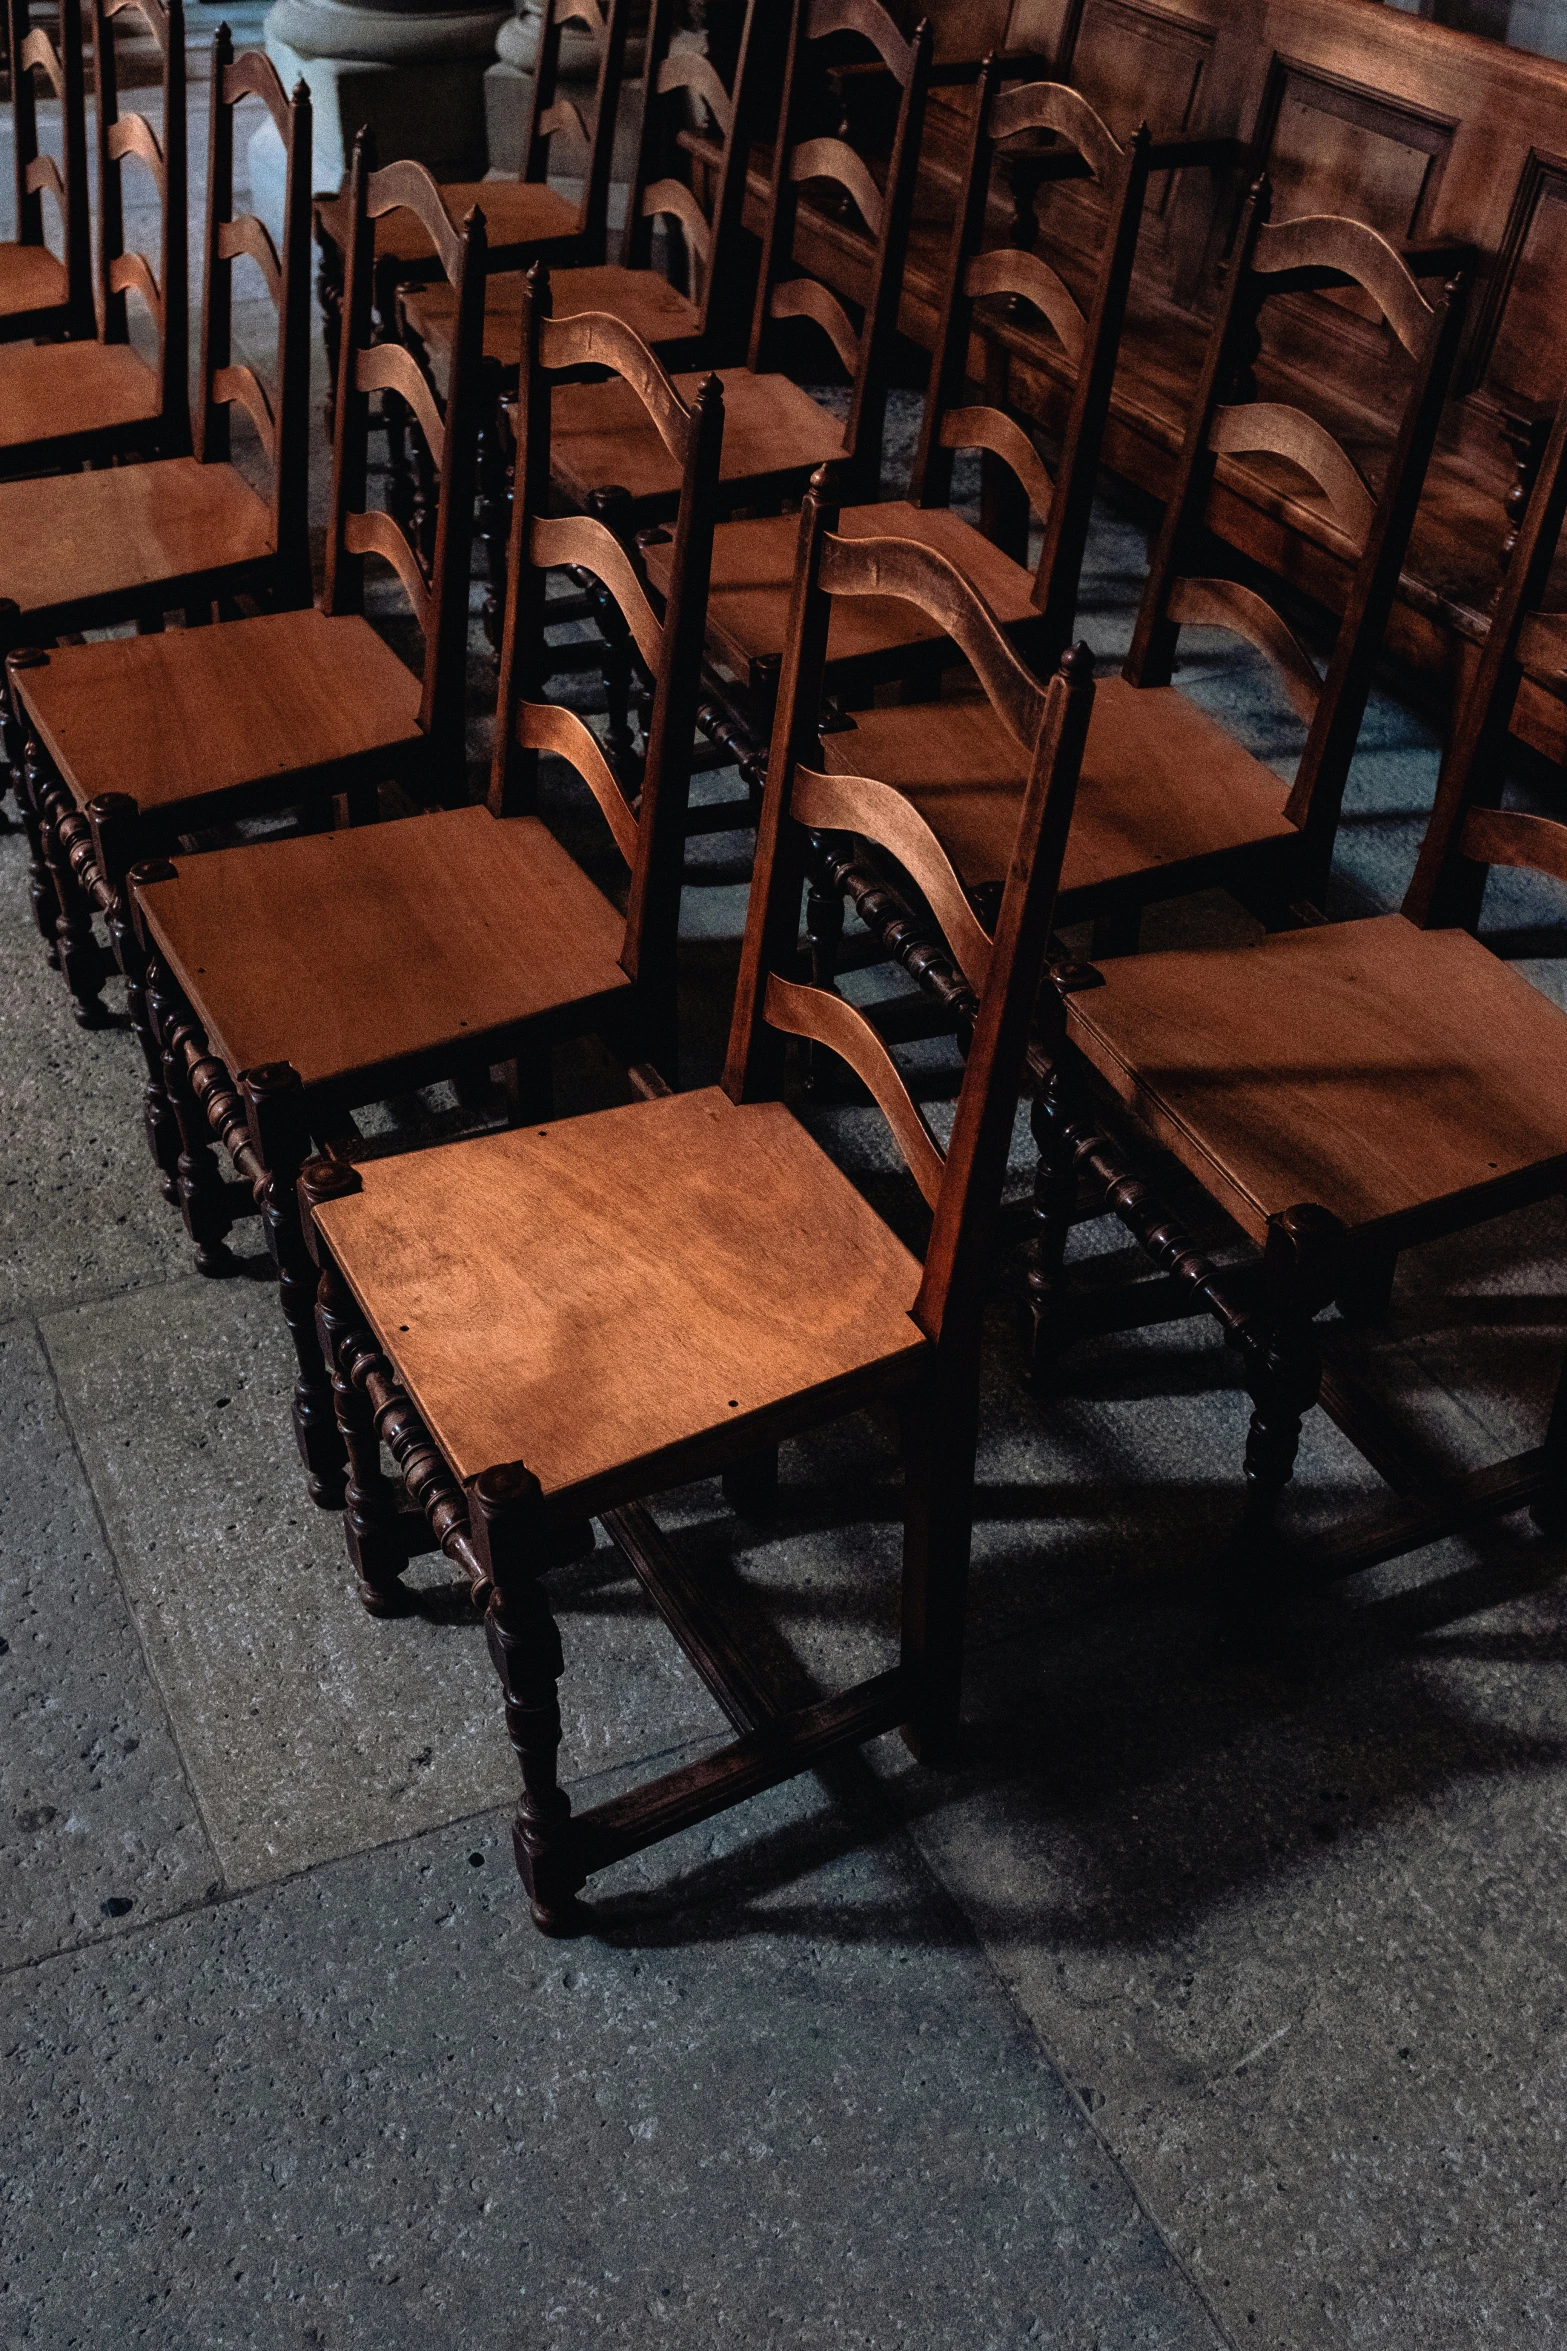 a set of eight wooden chairs sitting on the floor